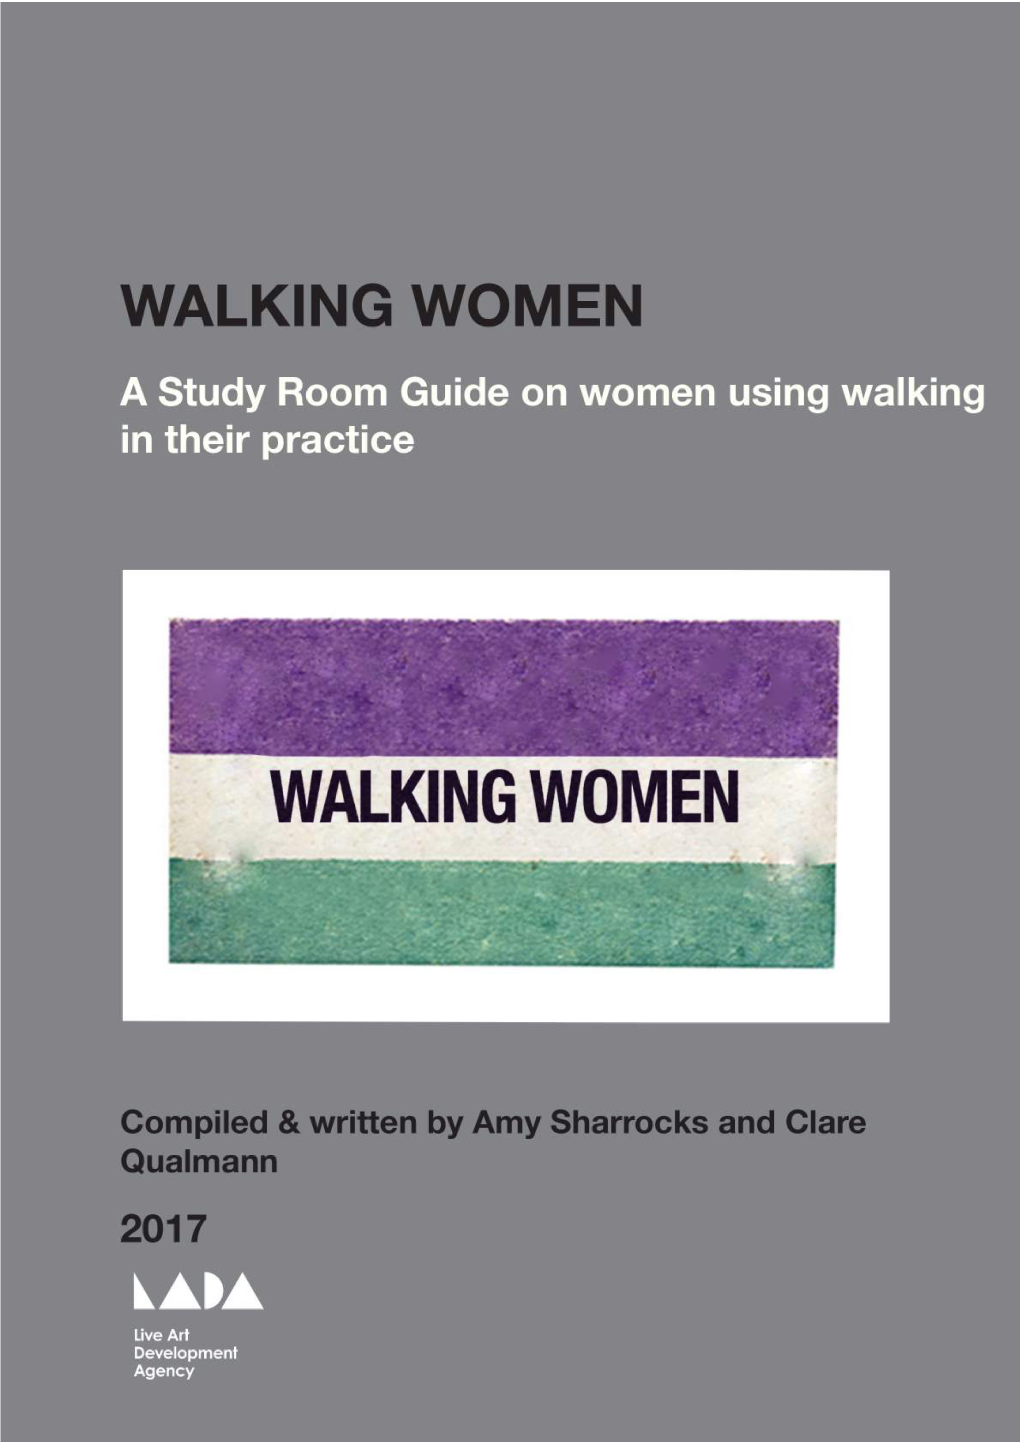 WALKING WOMEN Was a Series of Events Held in July and August 2016 Celebrating the Work of Women Using Walking in Their Creative Practice